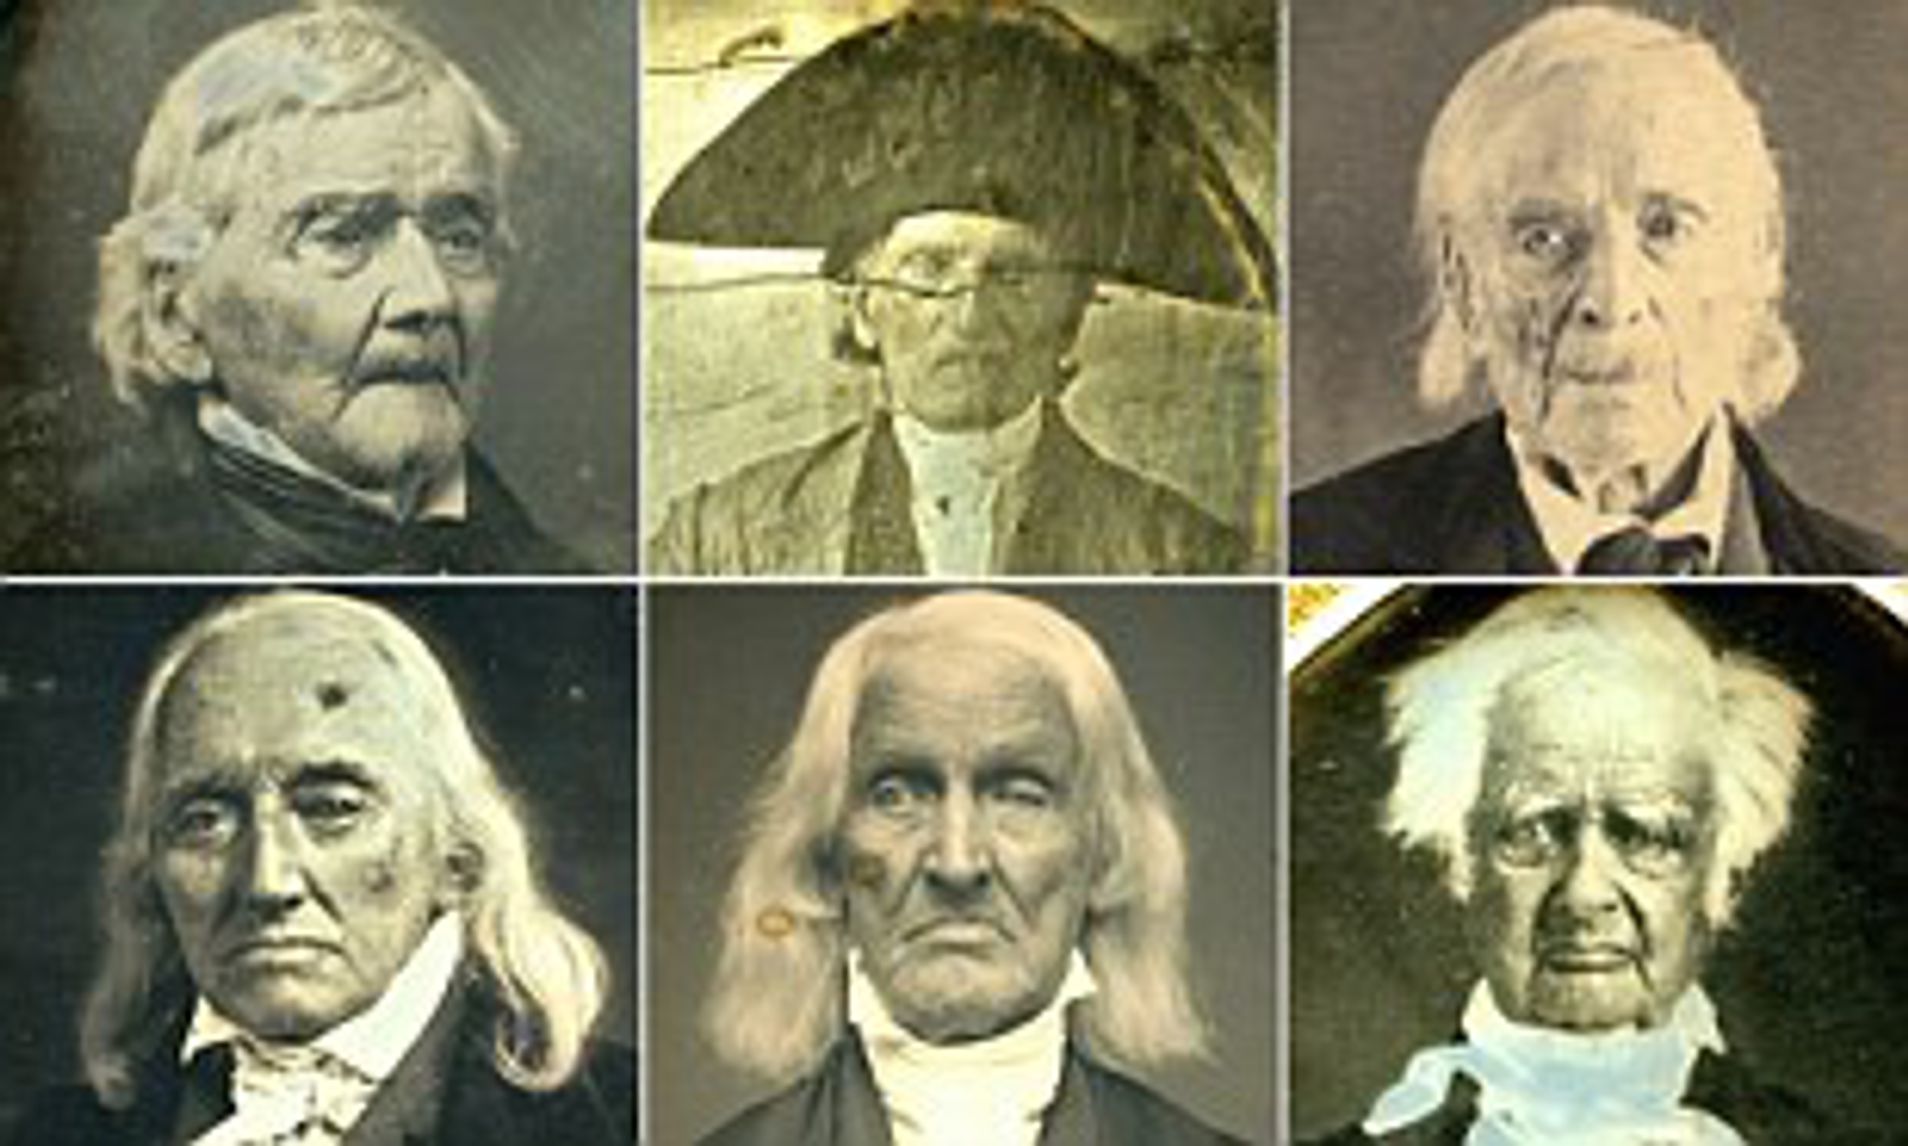 Revolutionary War Facts - Fourteen American Revolutionary War Veterans Lived Long Enough to Have Their Photos Taken. Most Were Over a Hundred Years Old By Then